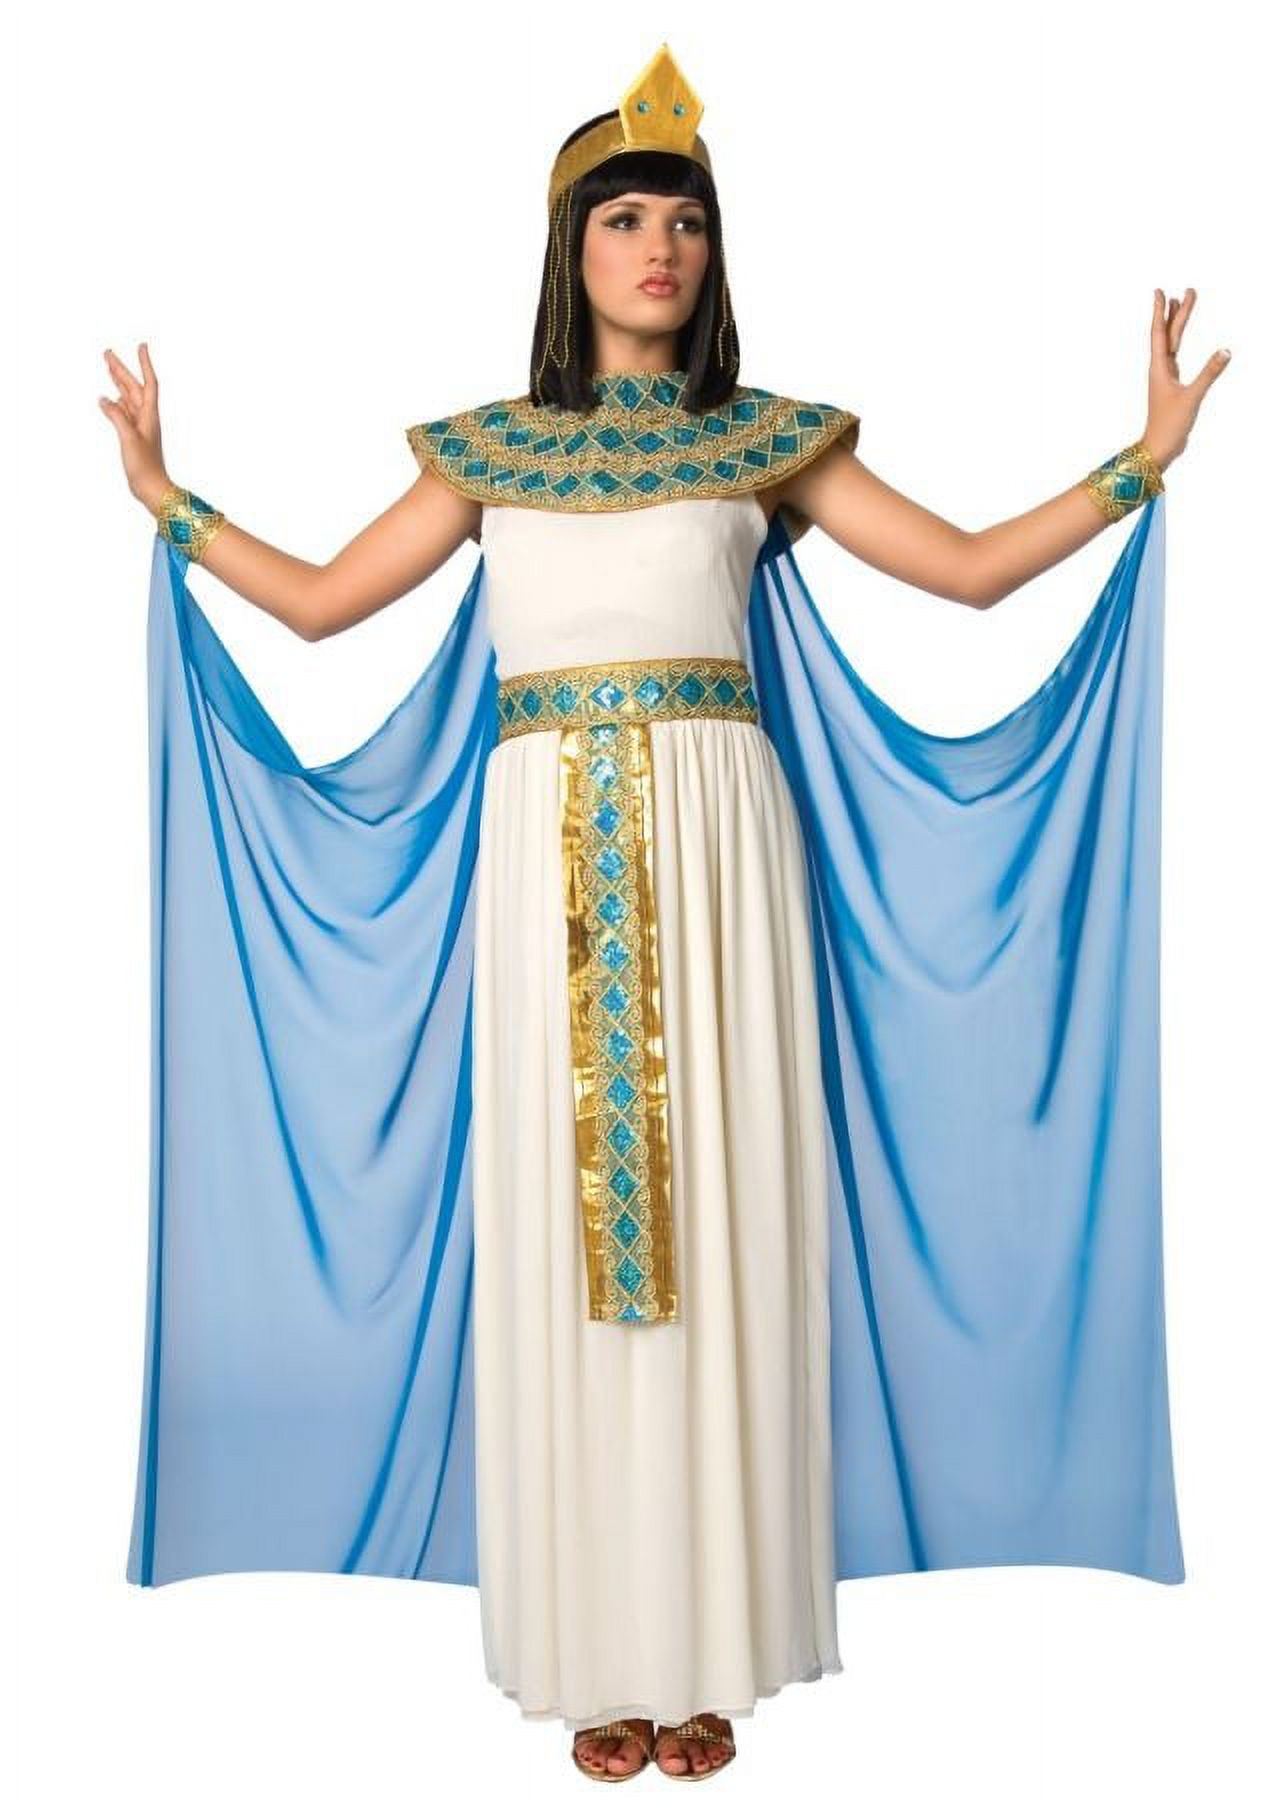 Palamon Egyptian Cleopatra Women's Halloween Fancy-Dress Costume for Adult, S - image 1 of 2